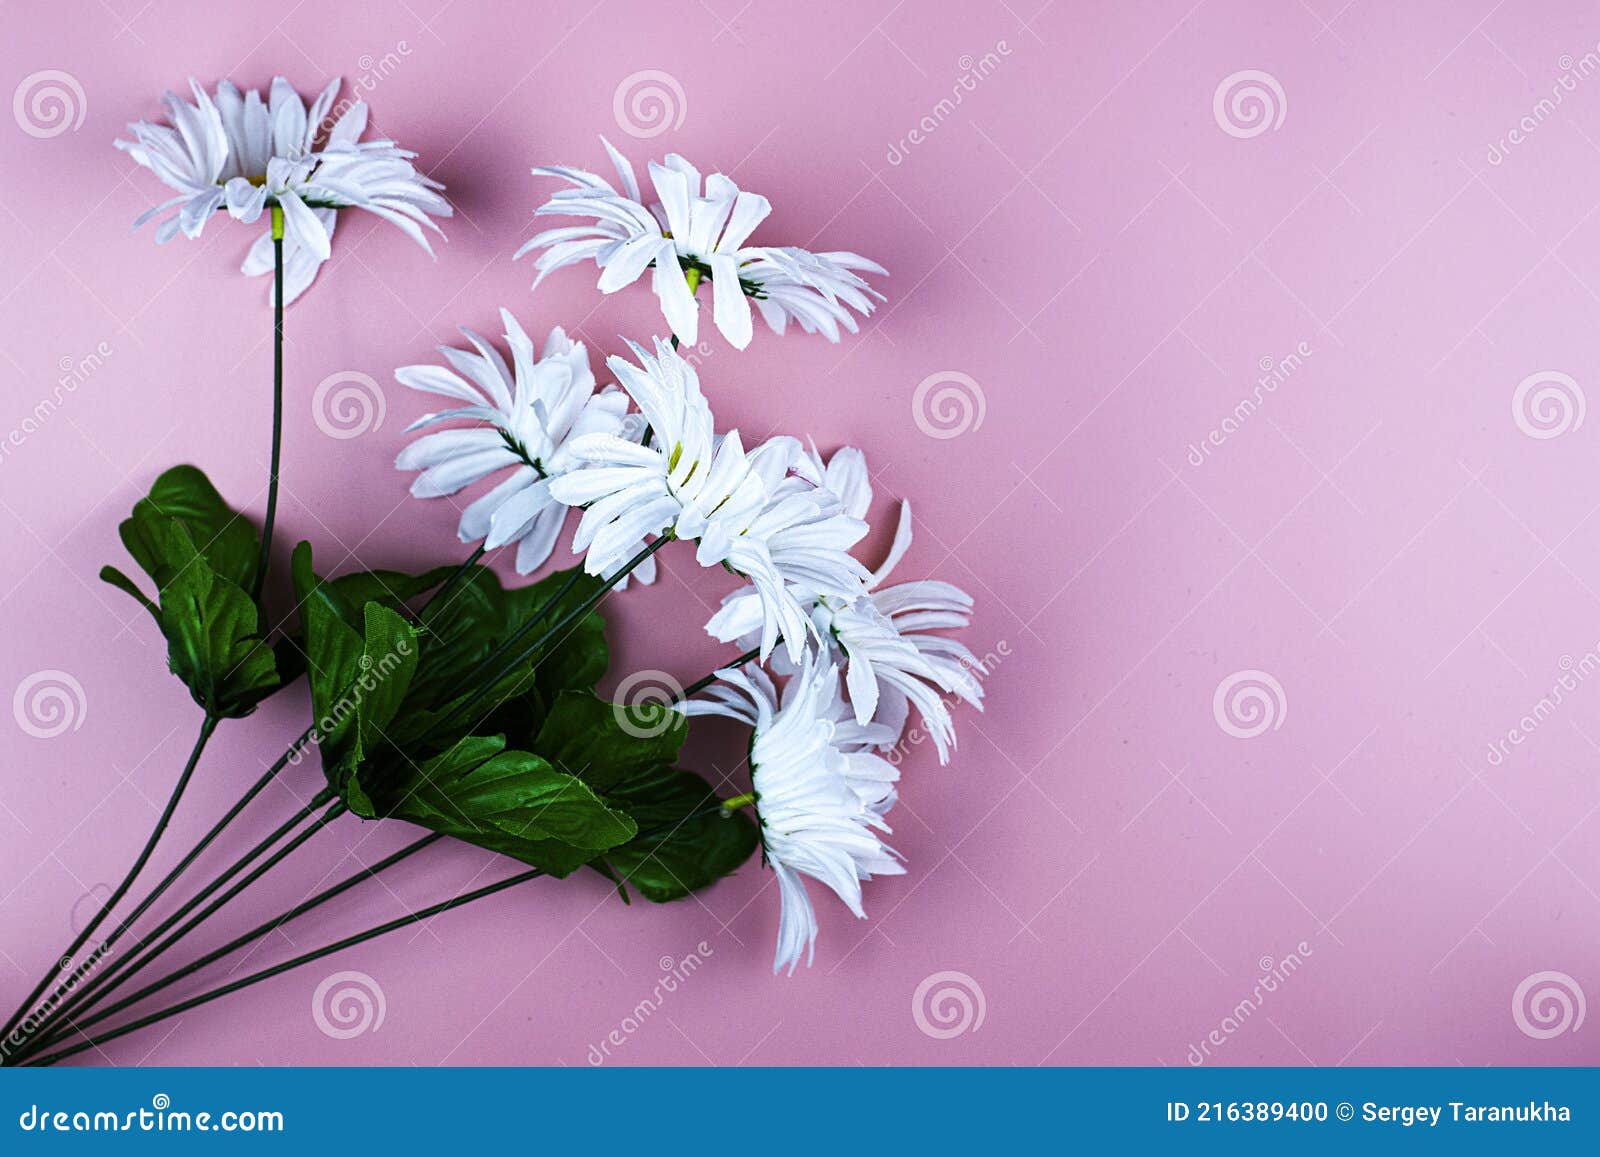 White Plastic Flowers on Pink Background Copyspace Greeting Card ...